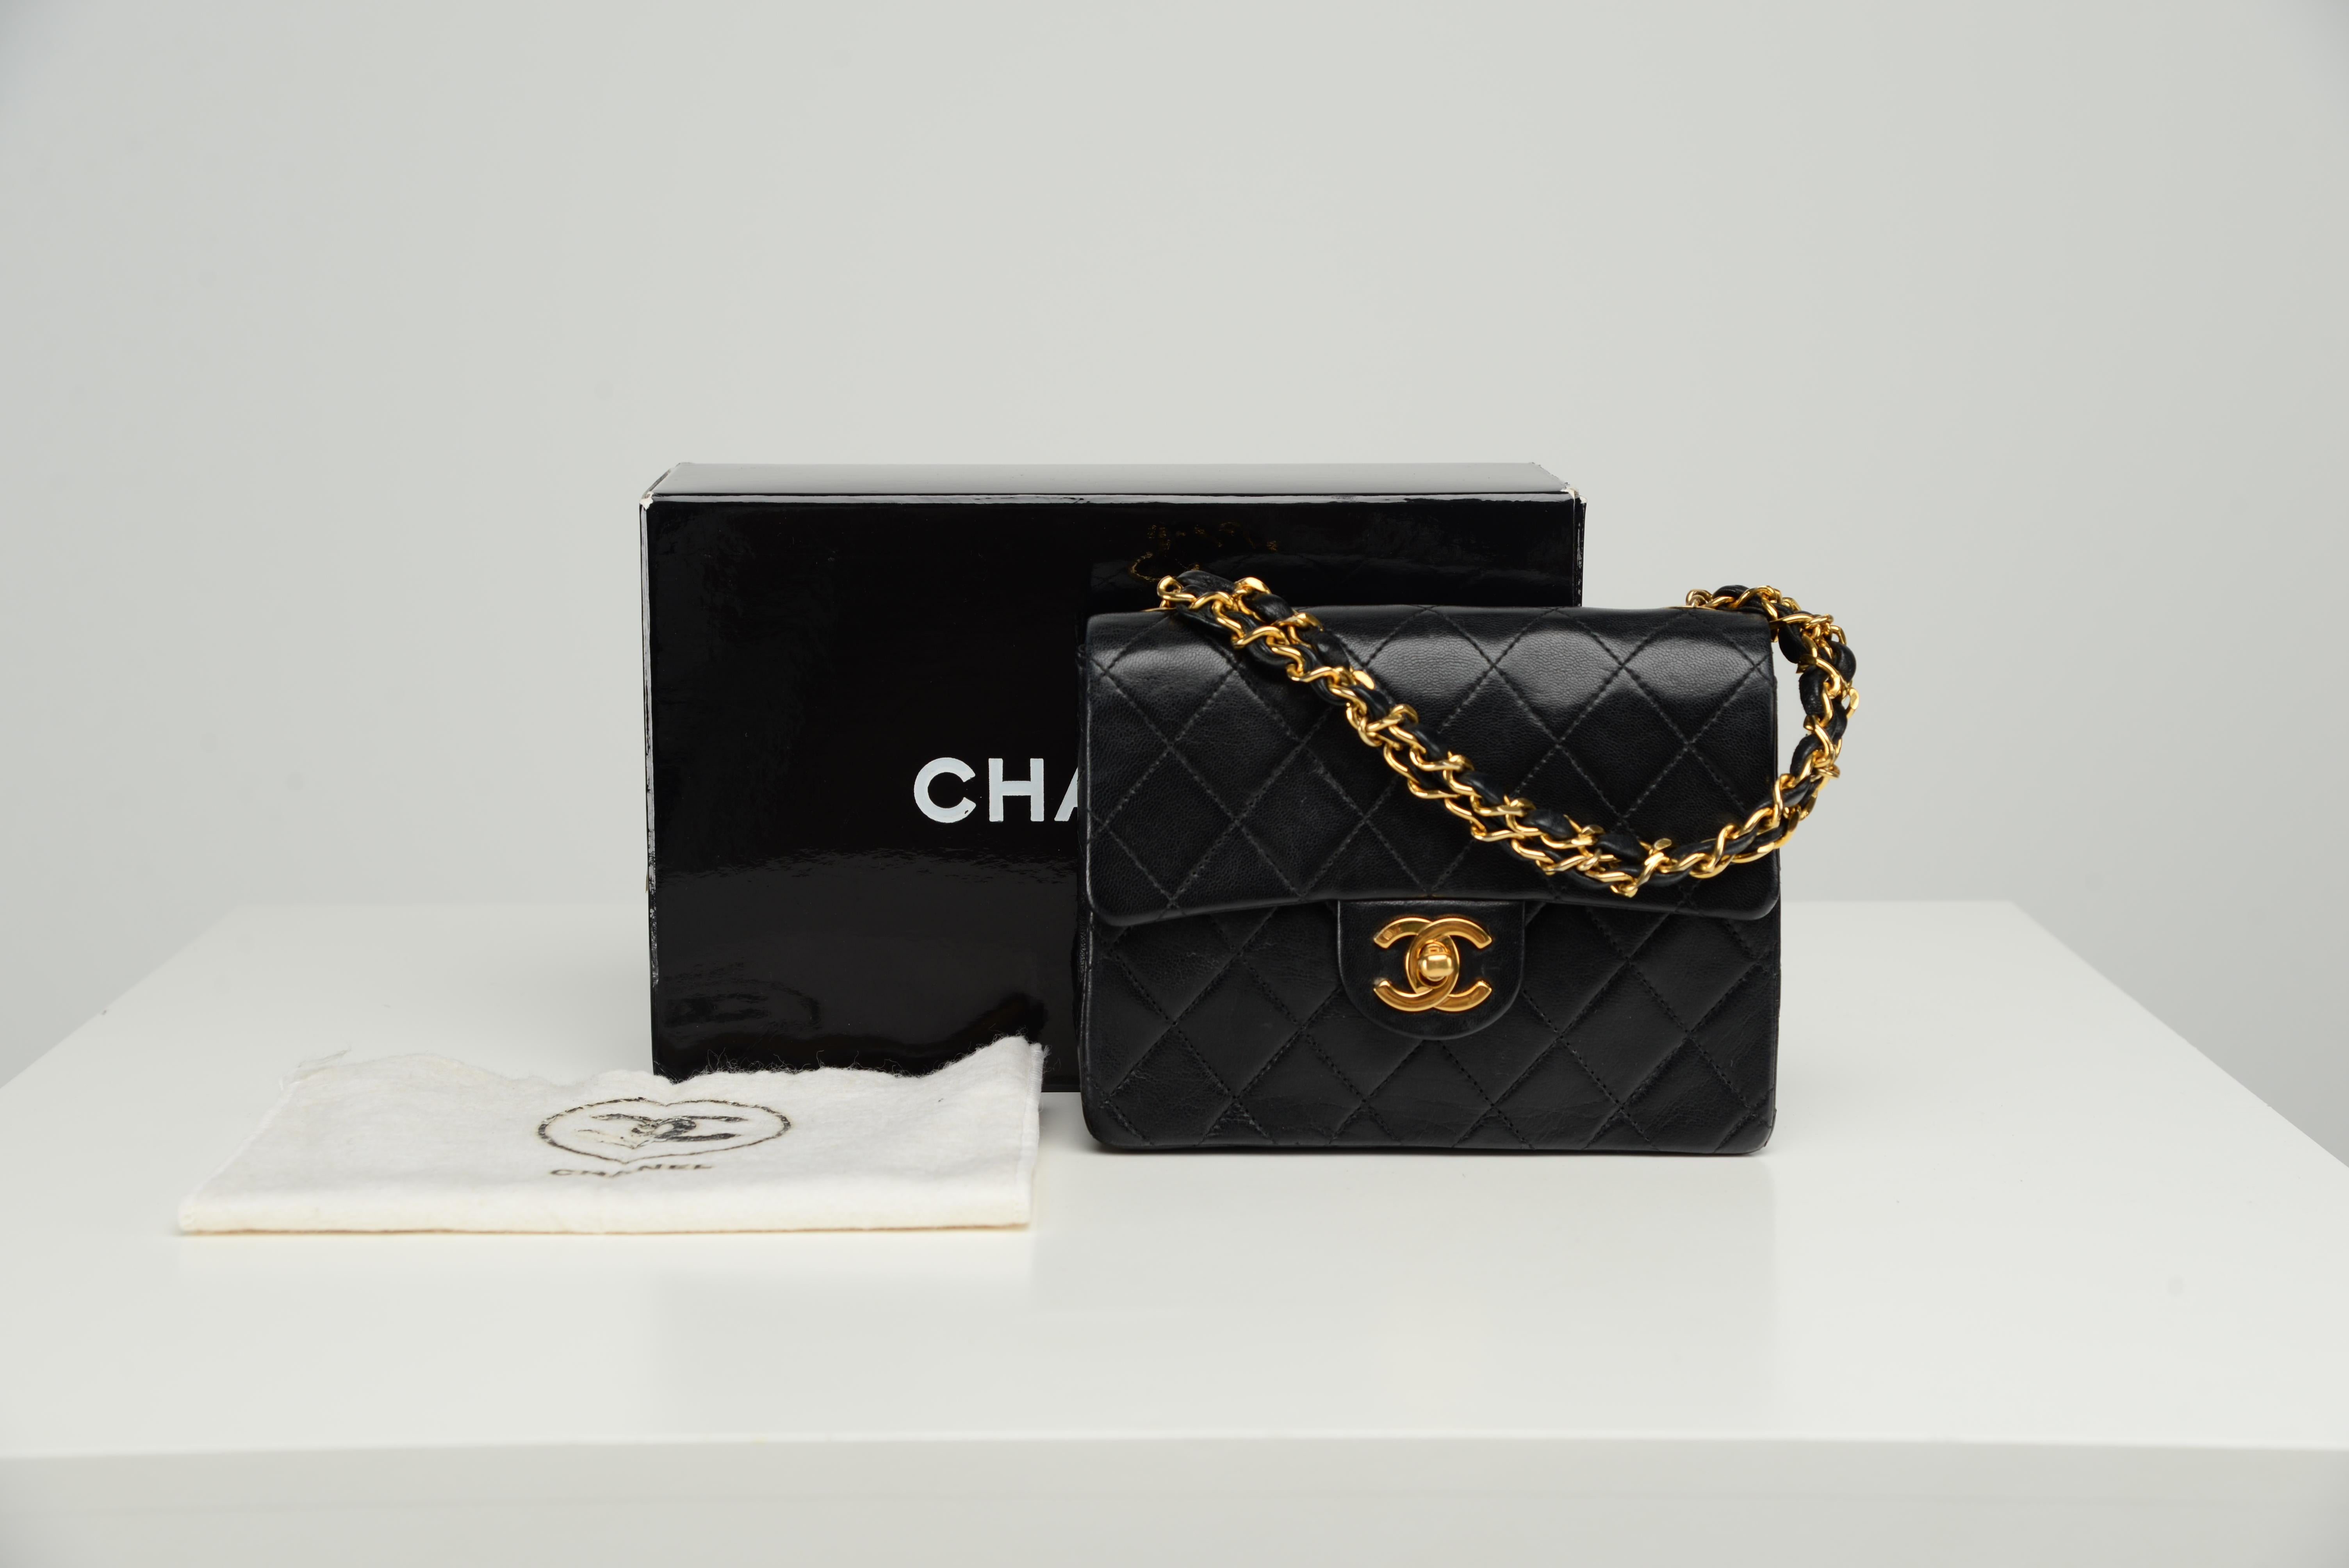 From the collection of SAVINETI we offer this RARE Chanel Mini Square Top Handle Chain:
-	Brand: Chanel
-	Model: Mini Square, Top Handle Chain
-	Year: 1986-1988
-	Code: 0922620
-	Condition: Original Good Condition
-	Materials: Lambskin Leather, 24k